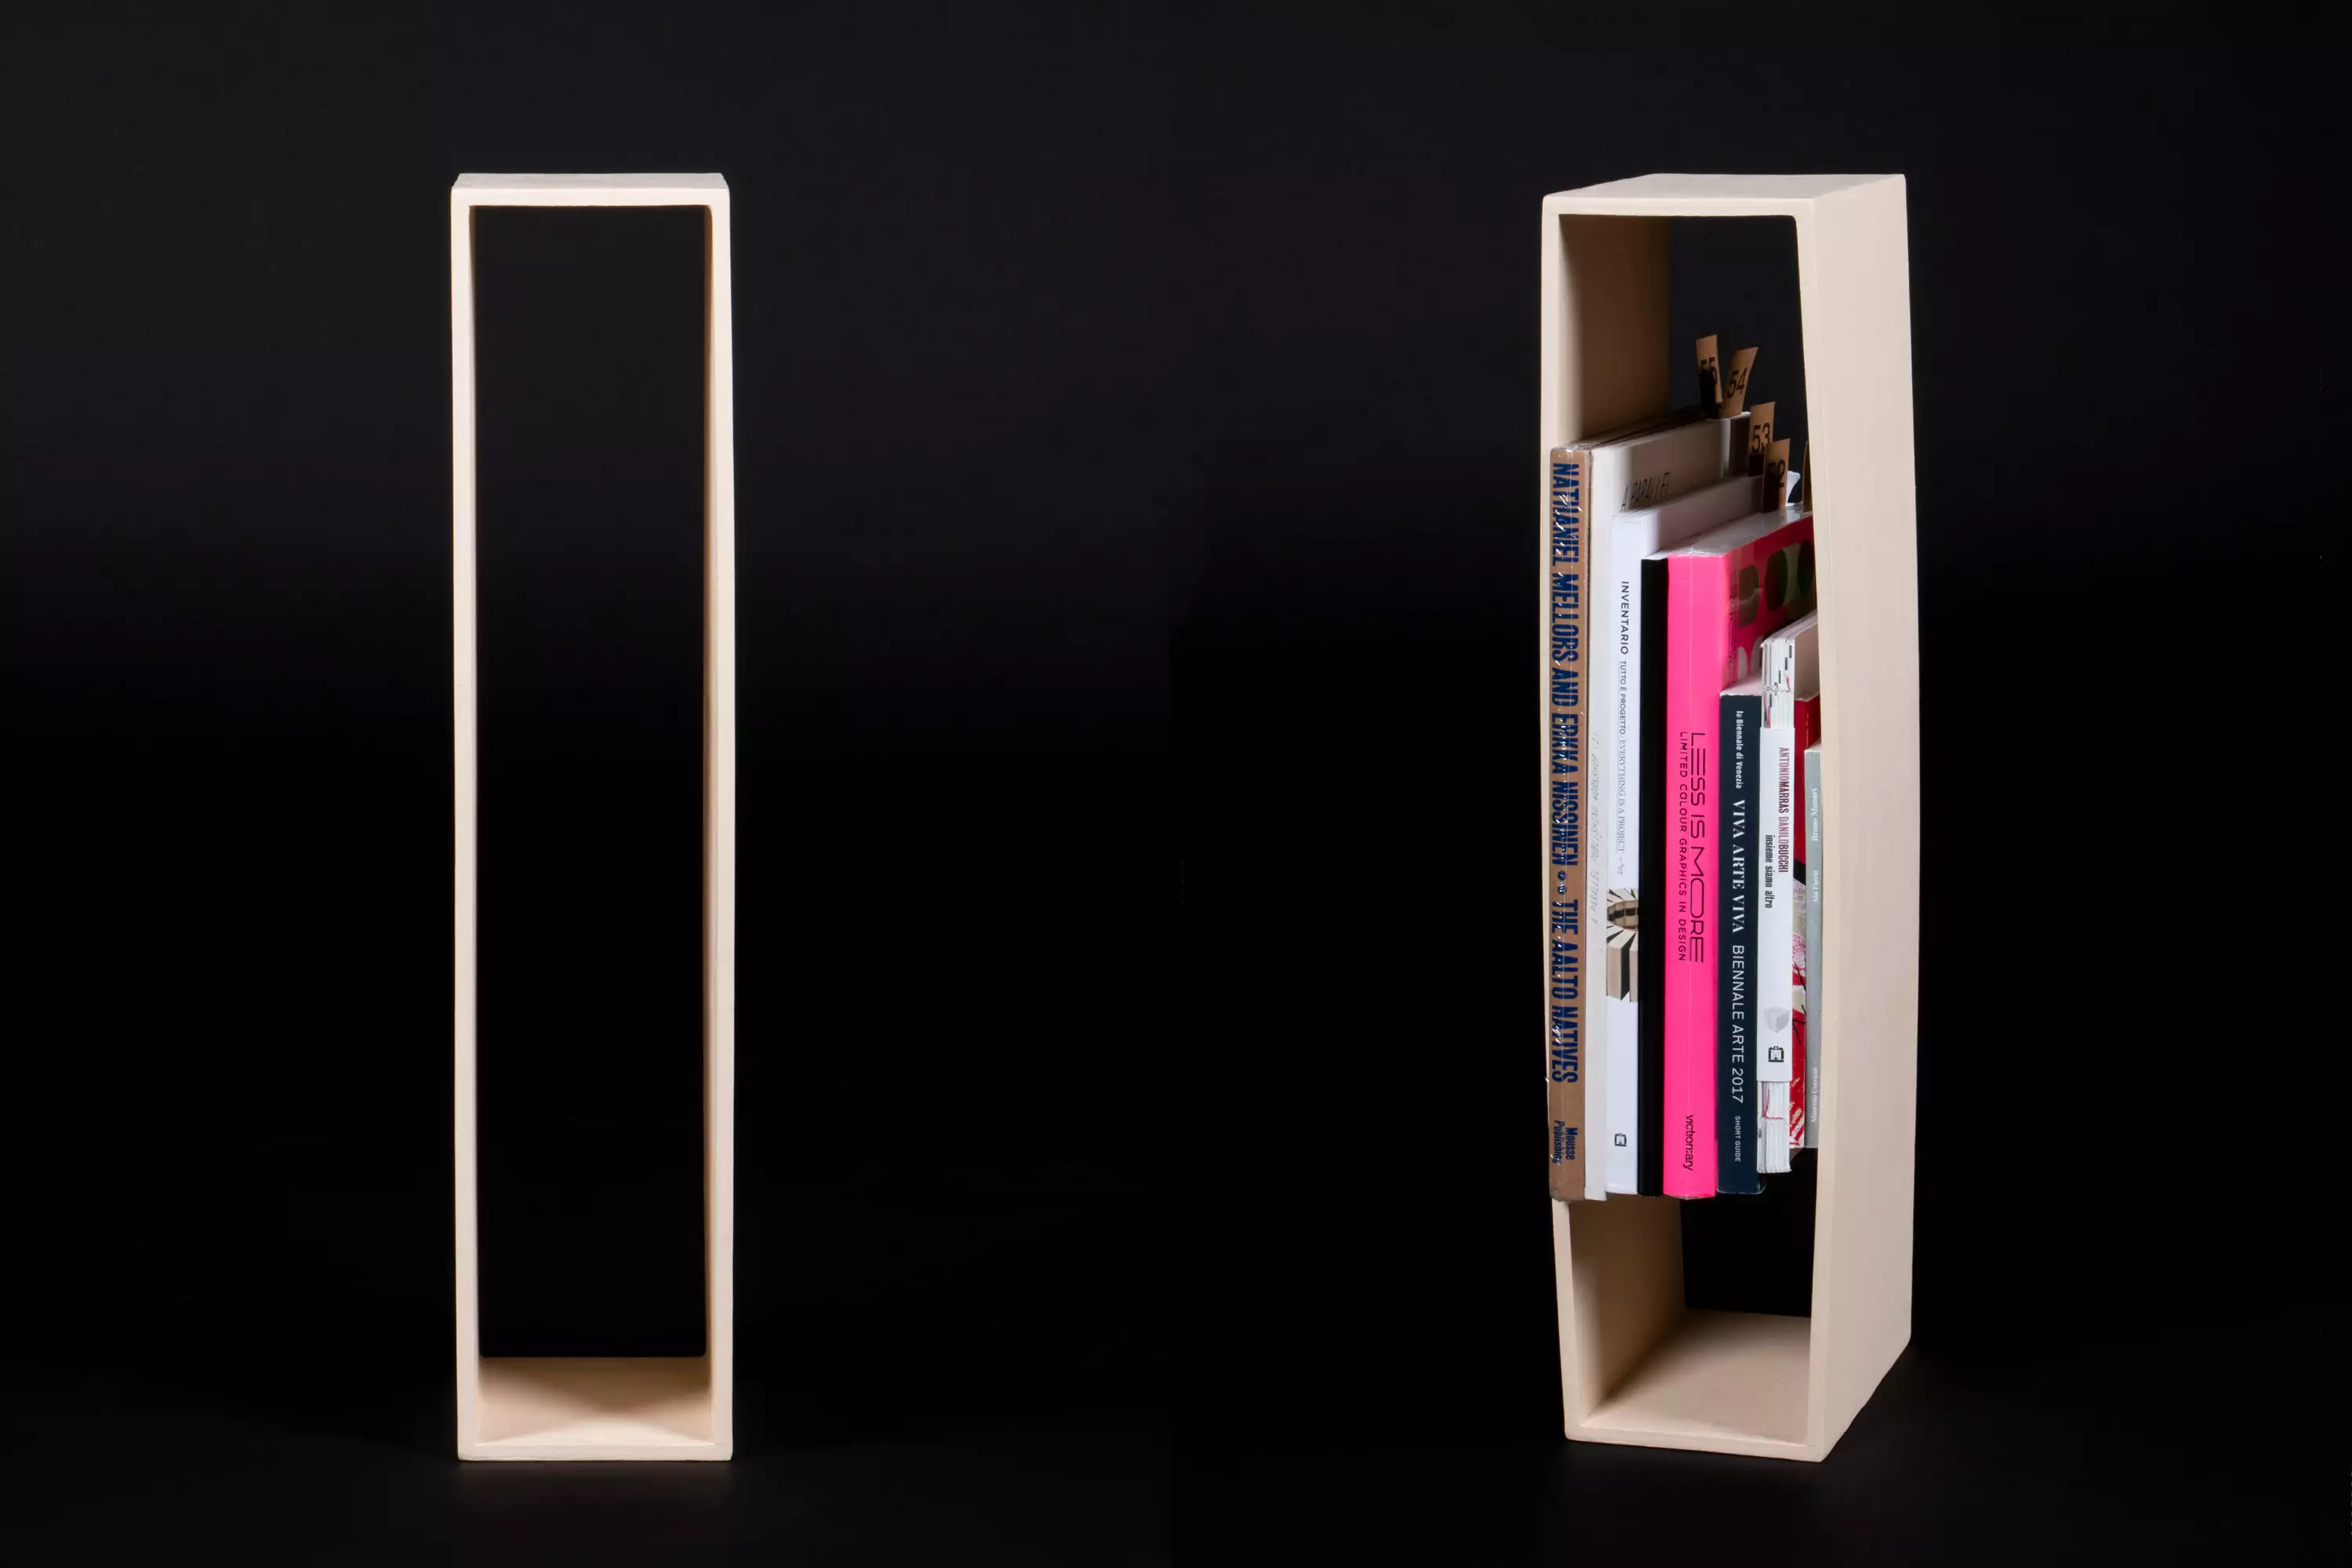 Two images of a bookshelf that holds books by pressure from both sides so that they are suspended.